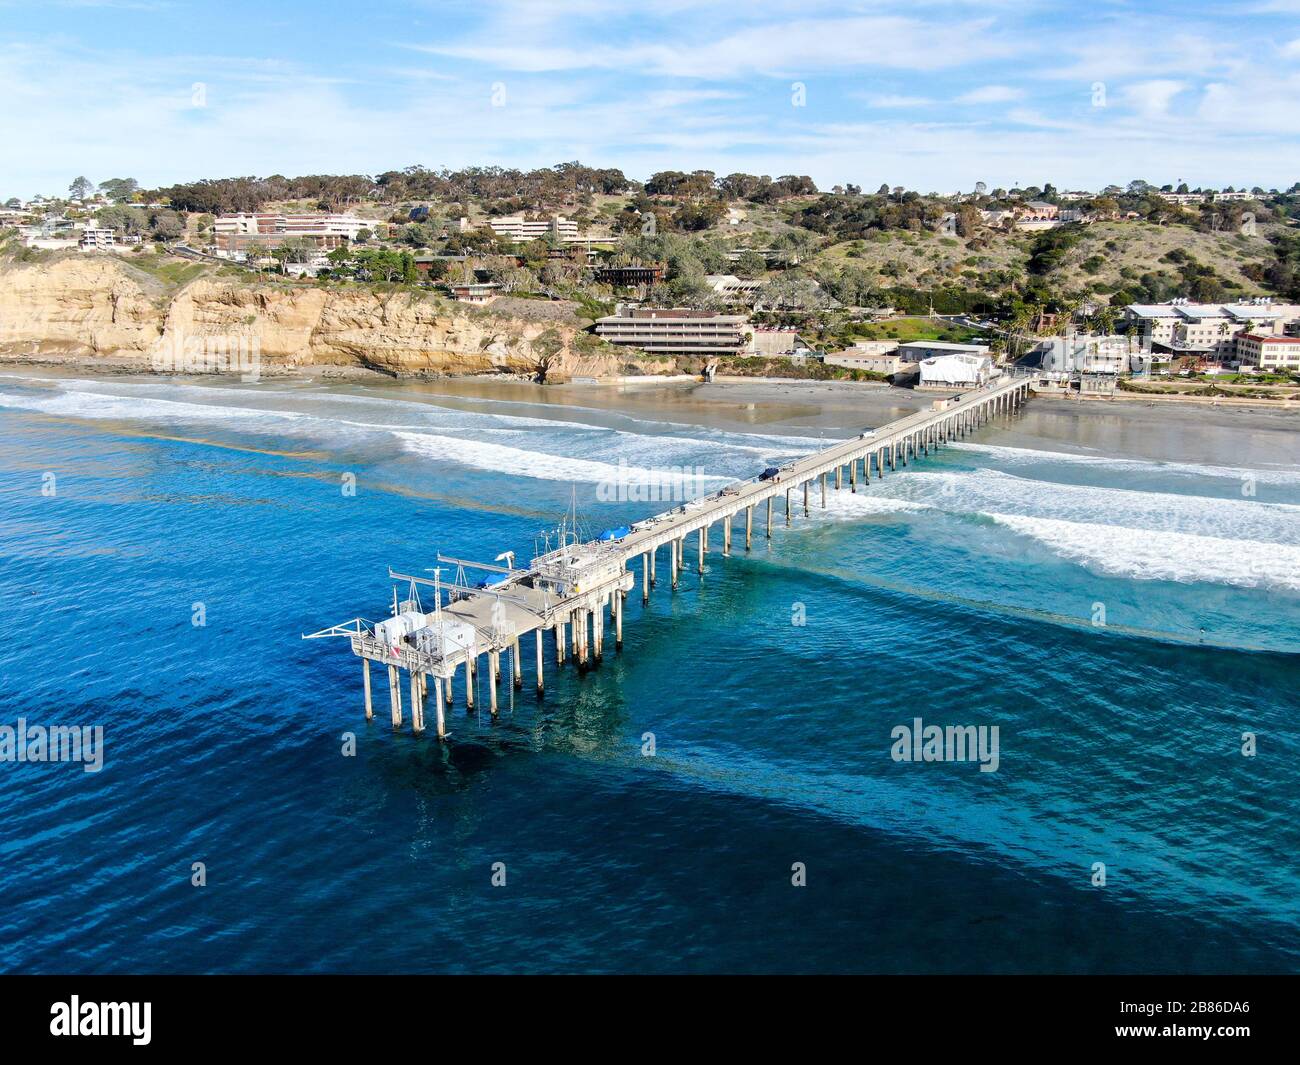 Aerial view of the scripps pier institute of oceanography, La Jolla, San Diego, California, USA. Research pier used to study ocean conditions and marine biology. Pier with luxury villa on the coast. Stock Photo